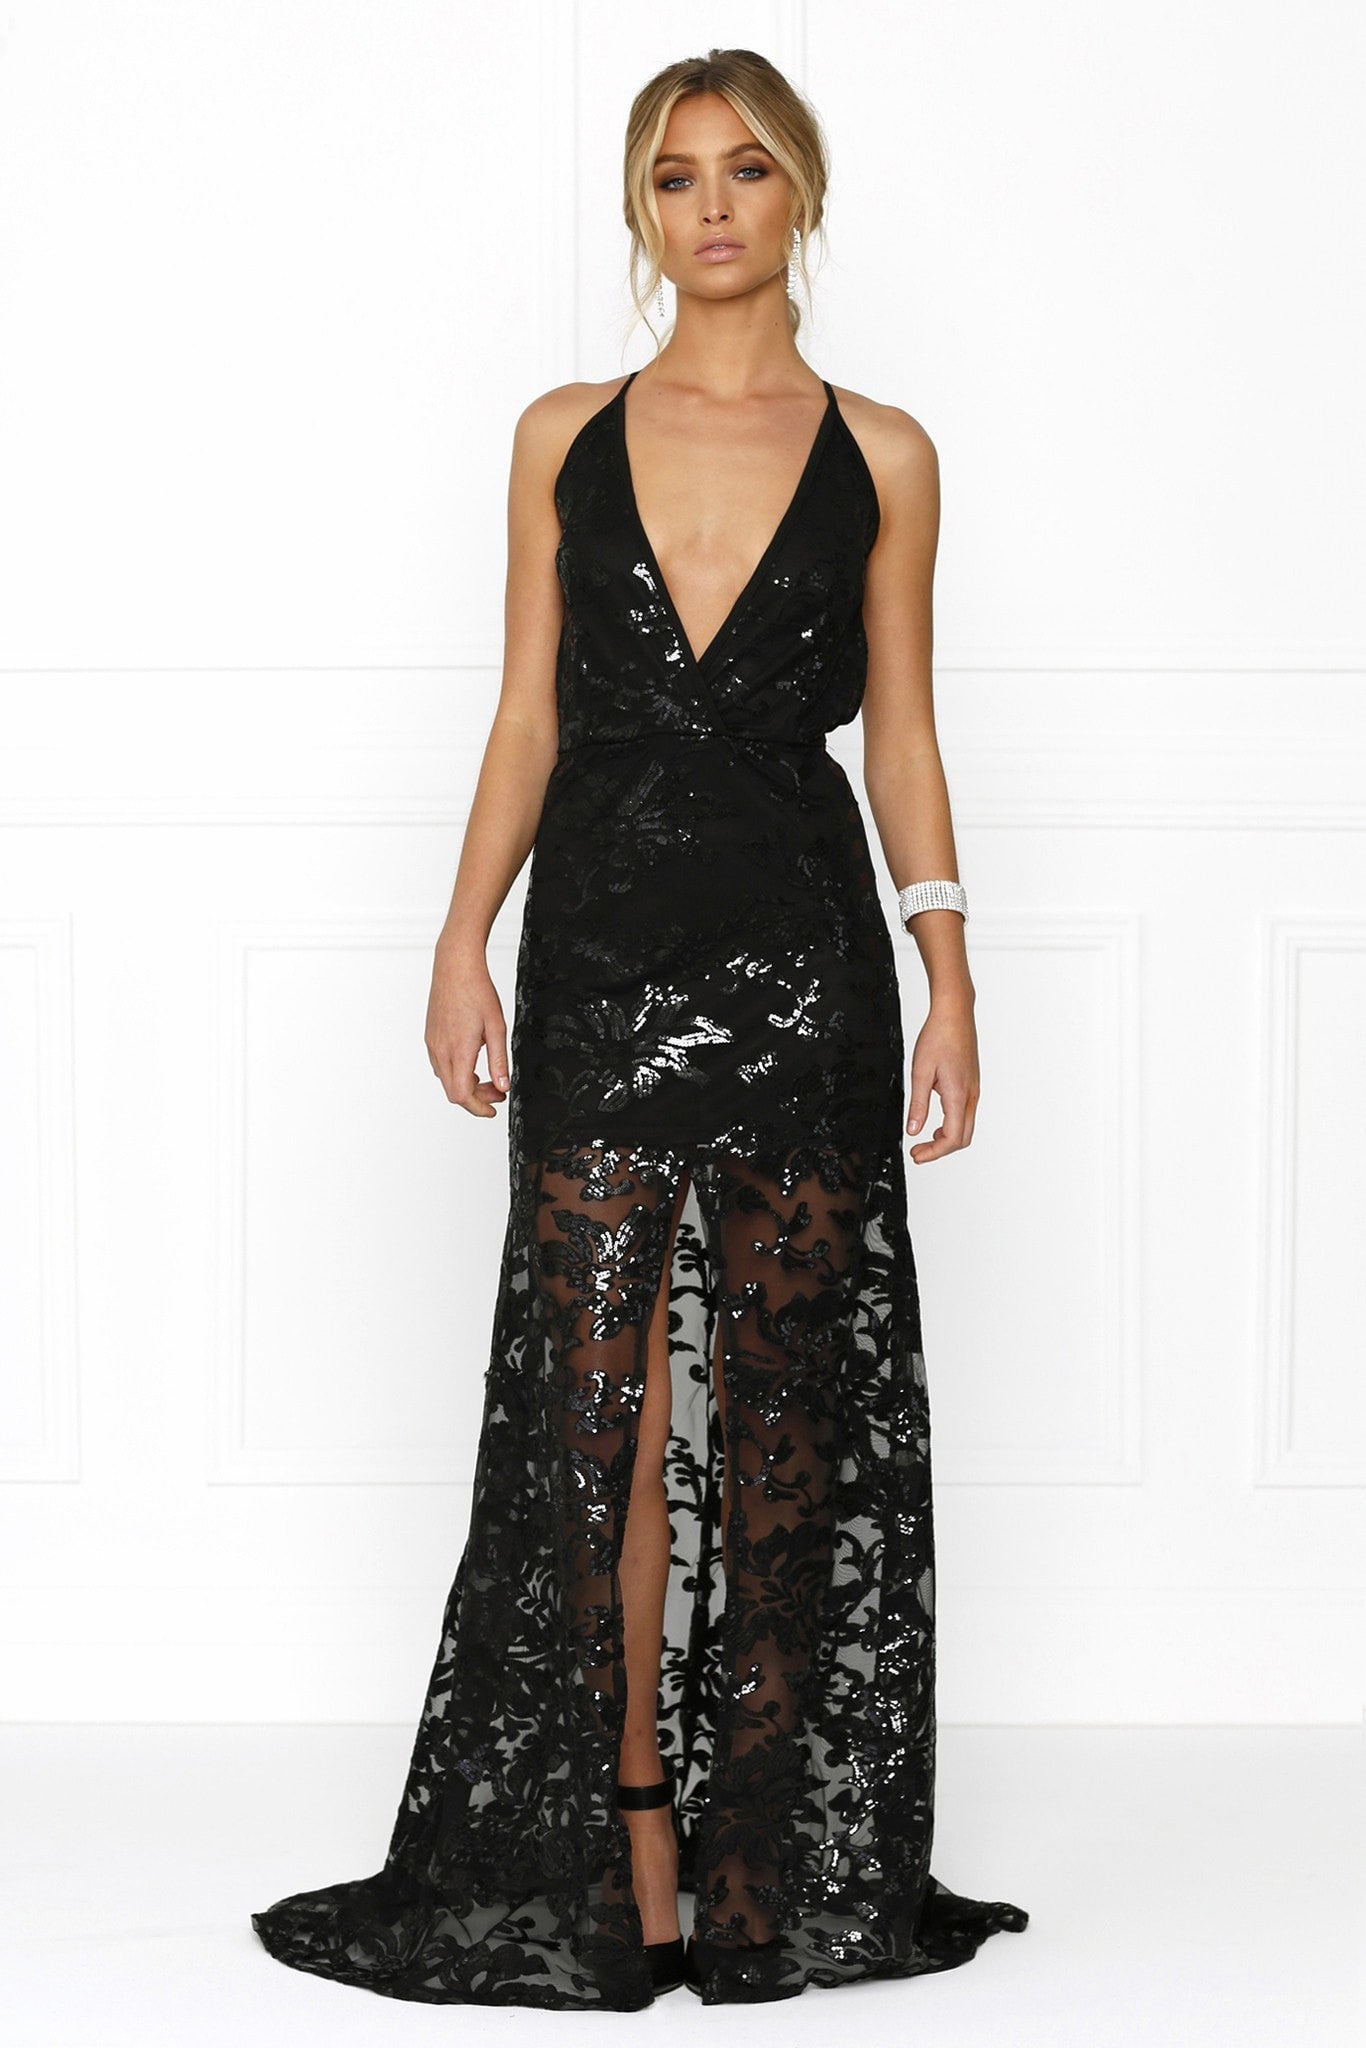 Honey Couture RENAE Black Sheer Lined Floral Print w Split Evening Gown Dress Honey Couture$ AfterPay Humm ZipPay LayBuy Sezzle